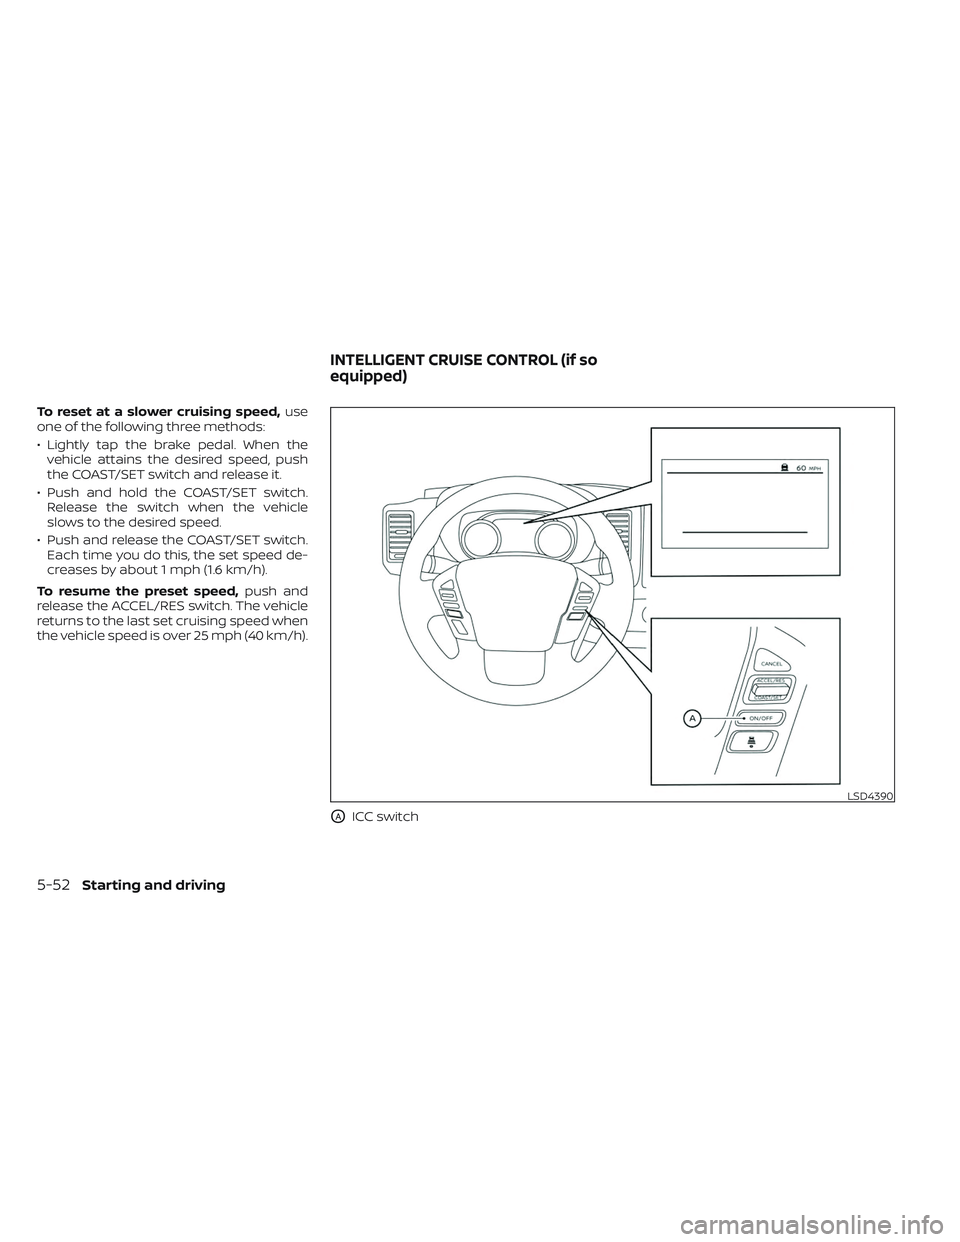 NISSAN FRONTIER 2023 Service Manual To reset at a slower cruising speed,use
one of the following three methods:
• Lightly tap the brake pedal. When the vehicle attains the desired speed, push
the COAST/SET switch and release it.
• P